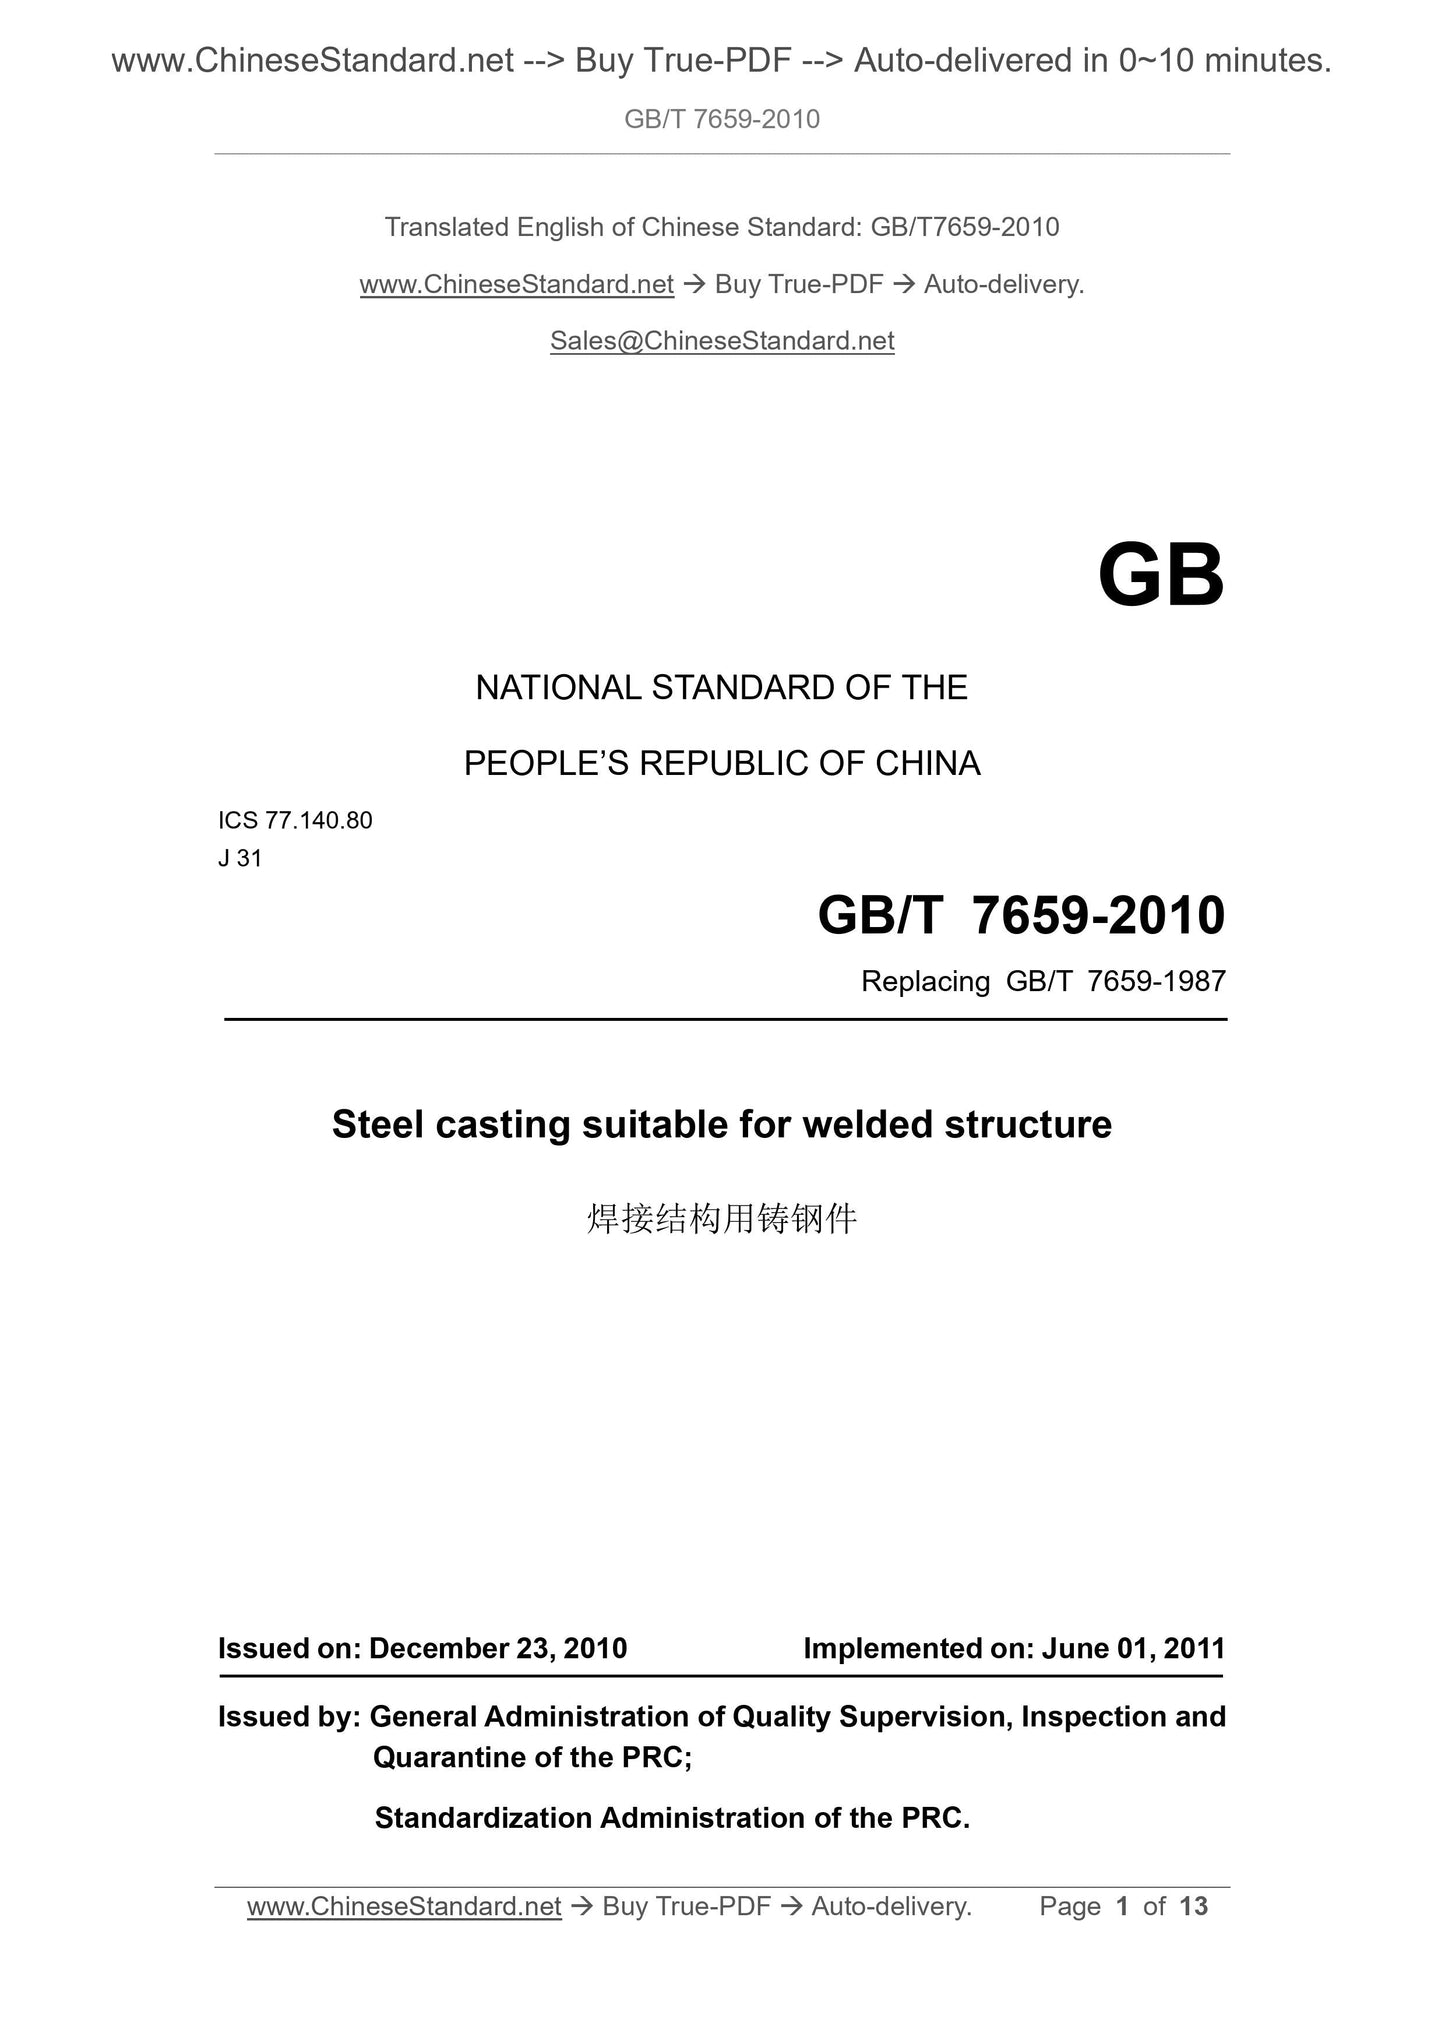 GB/T 7659-2010 Page 1